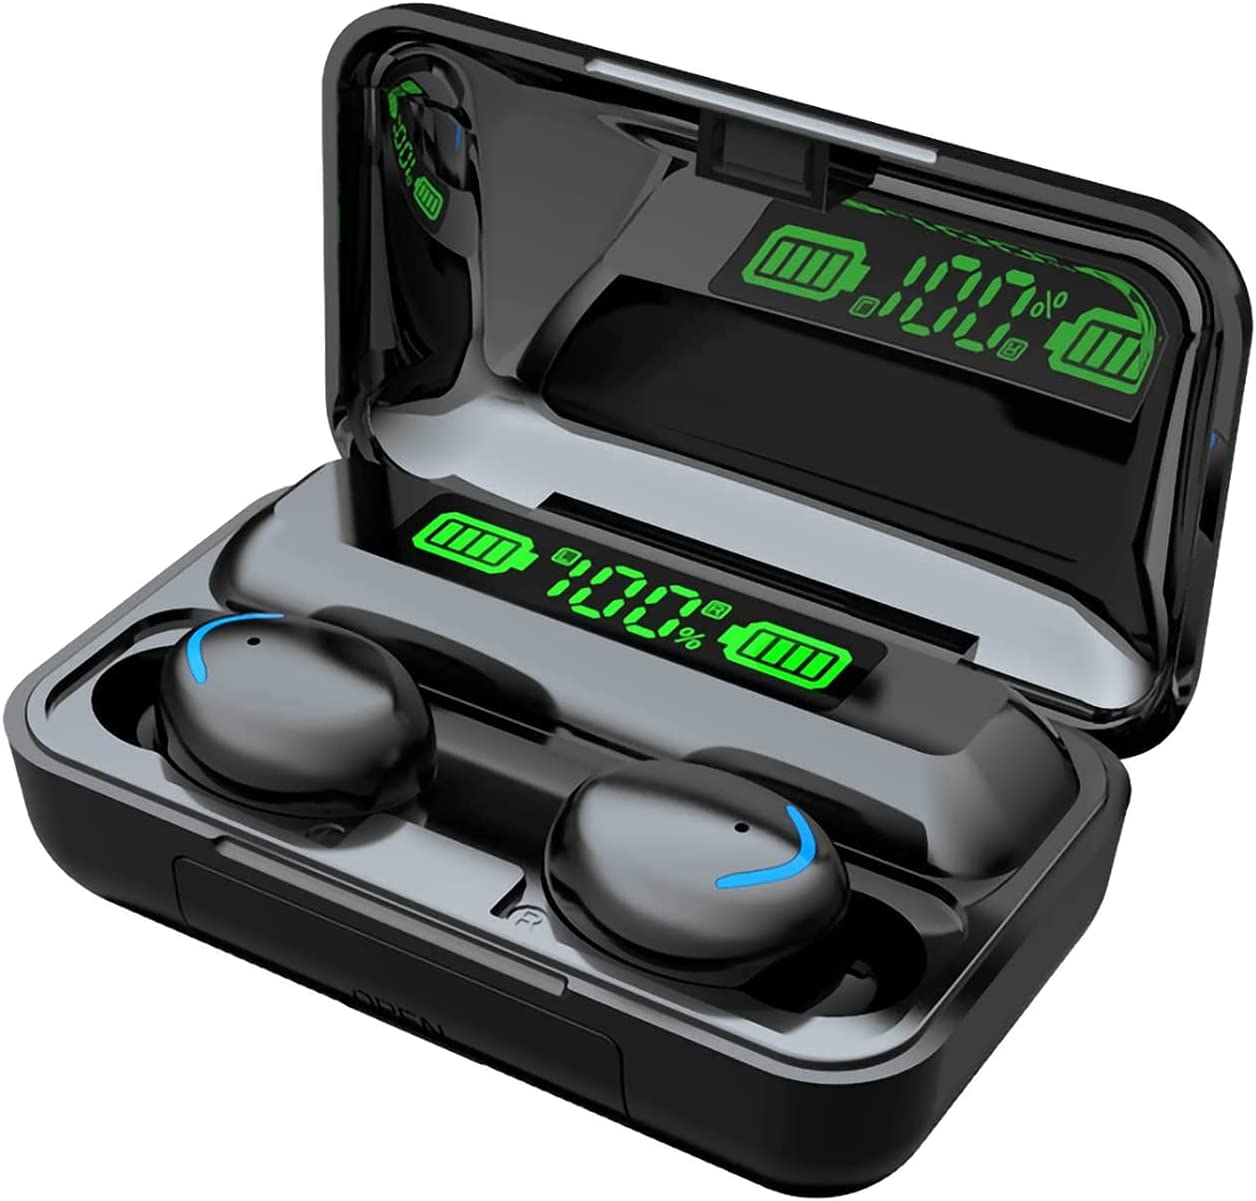 Wireless Bluetooth Earbuds with Power Bank